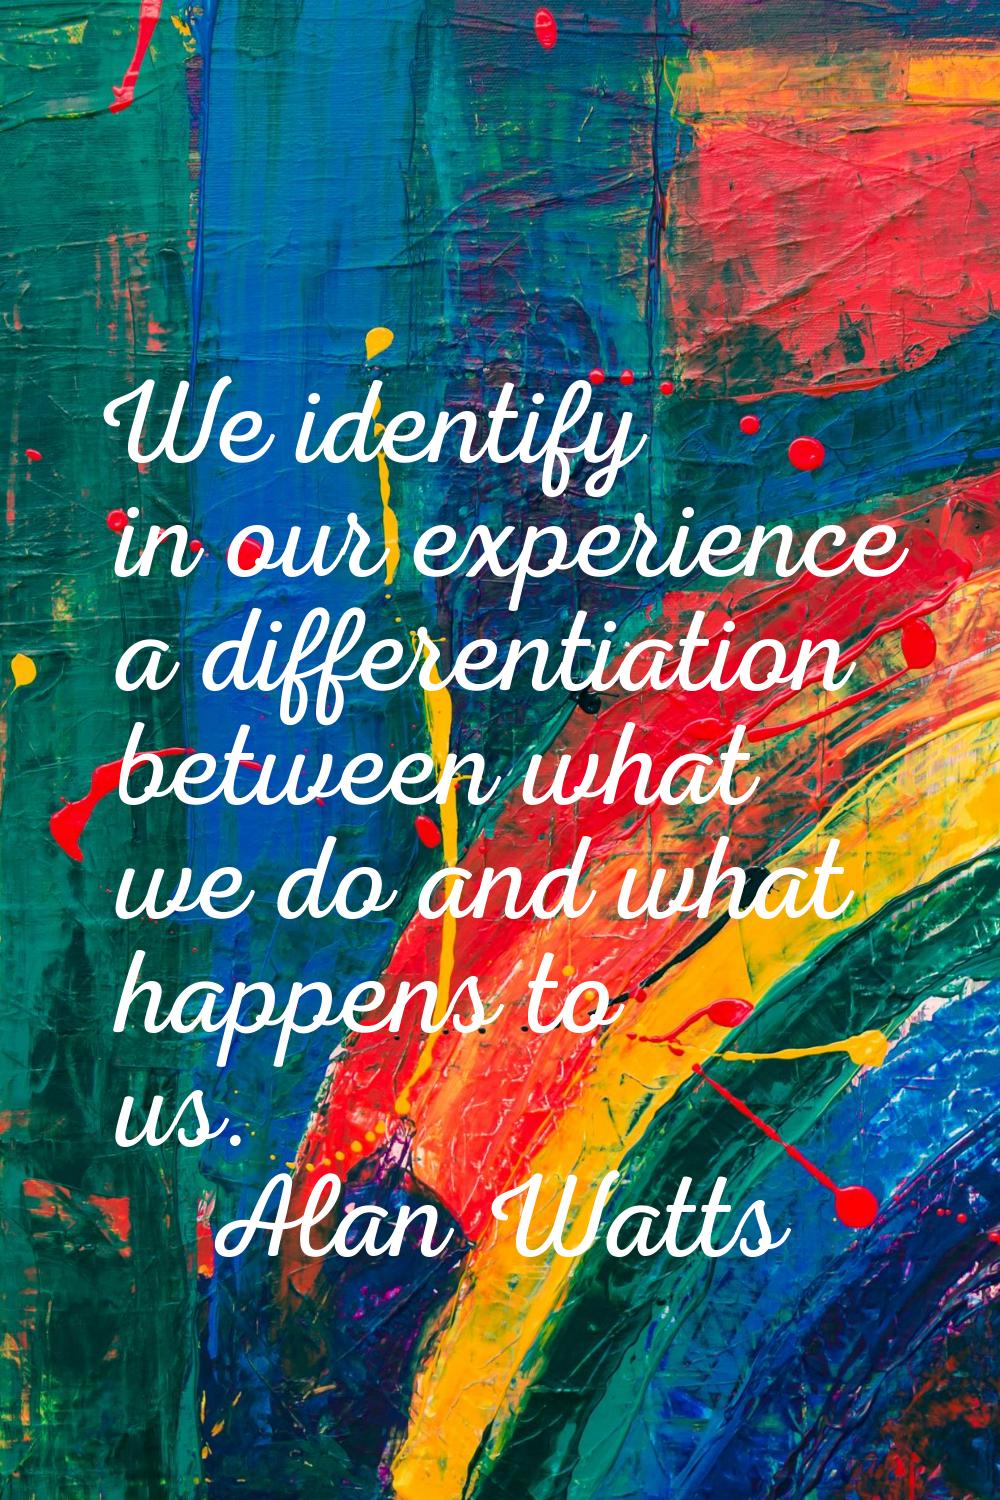 We identify in our experience a differentiation between what we do and what happens to us.